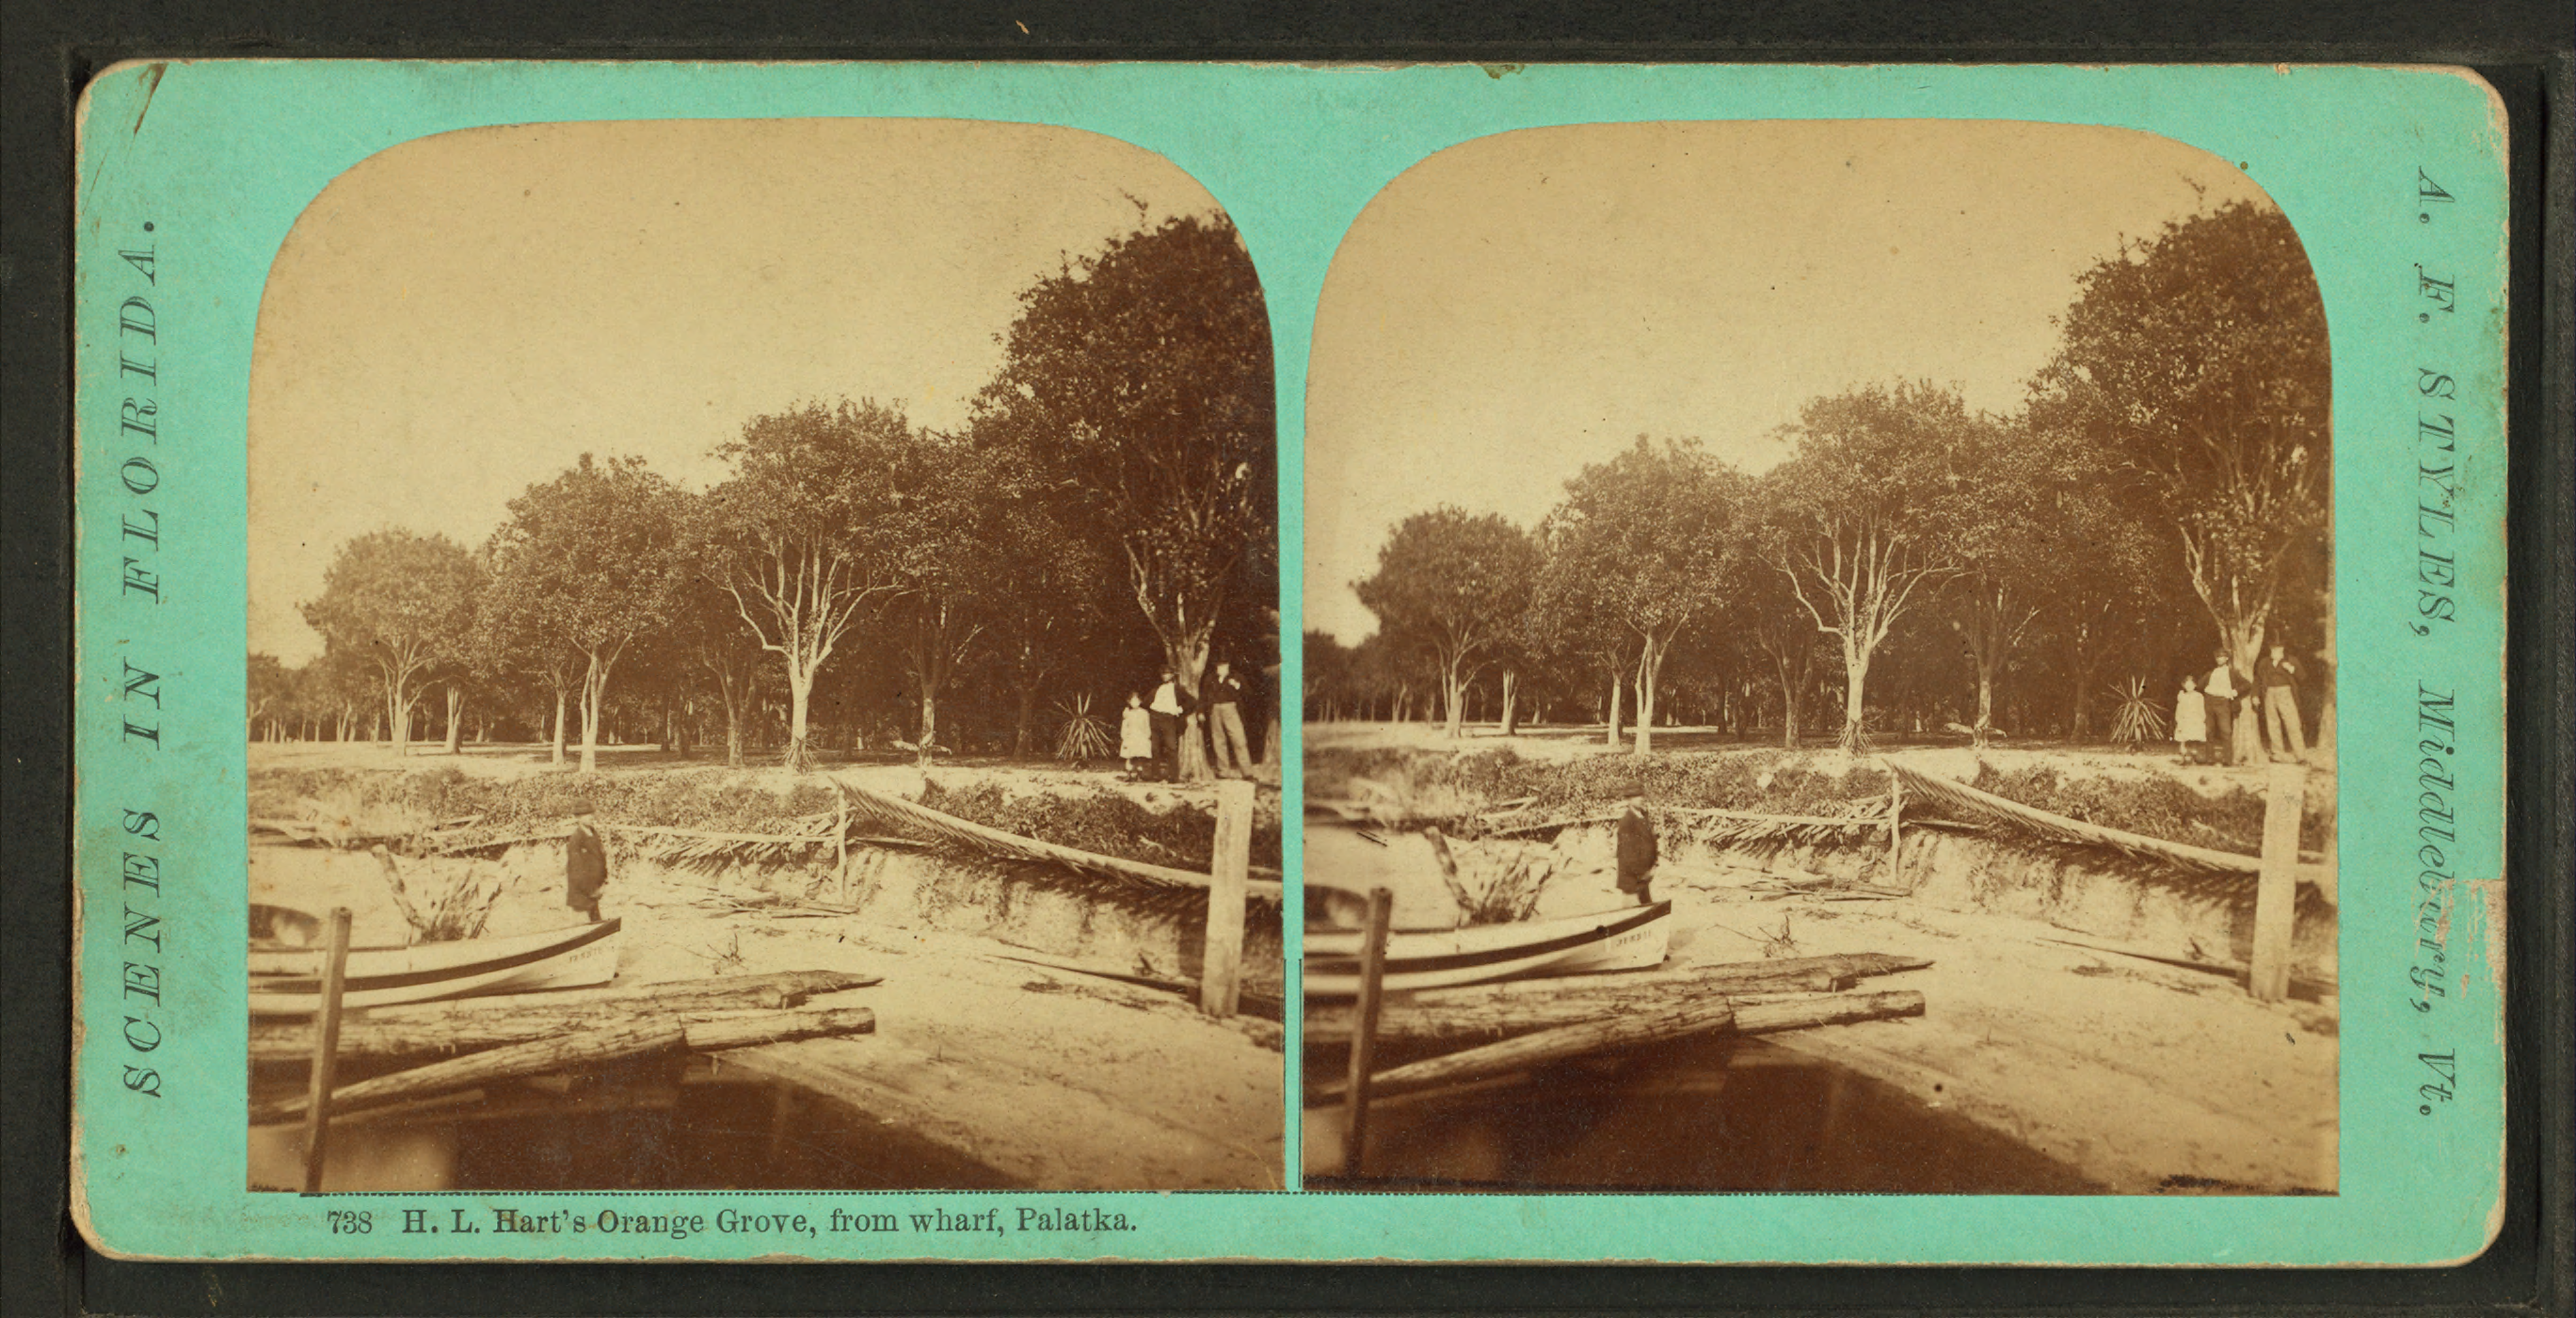 B.L. Hart's orange grove, from wharf, Palatka, from Robert N. Dennis collection of stereoscopic views